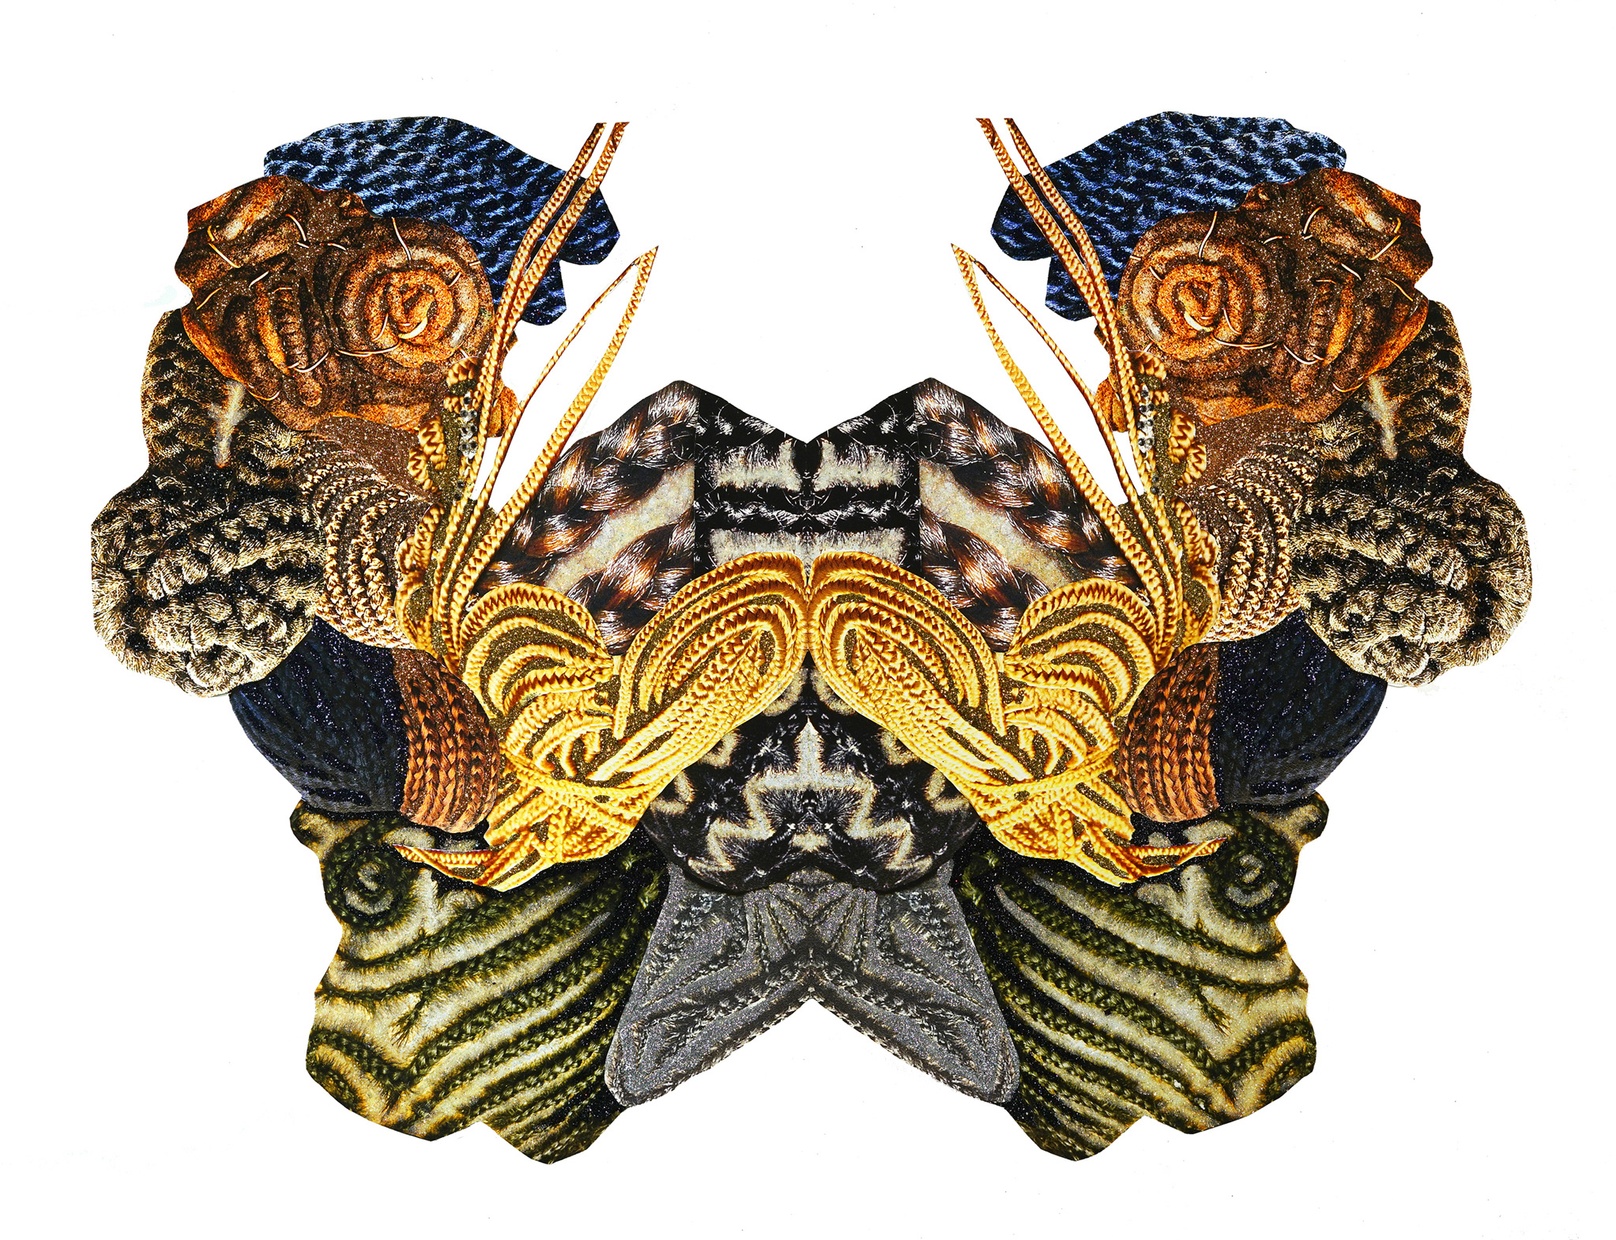 A colorful print of an abstract three-dimensional shape made of intricately collaged braided Black hairstyles. The sides mirror each other, with collaged diagonal braids fanning out from the center.